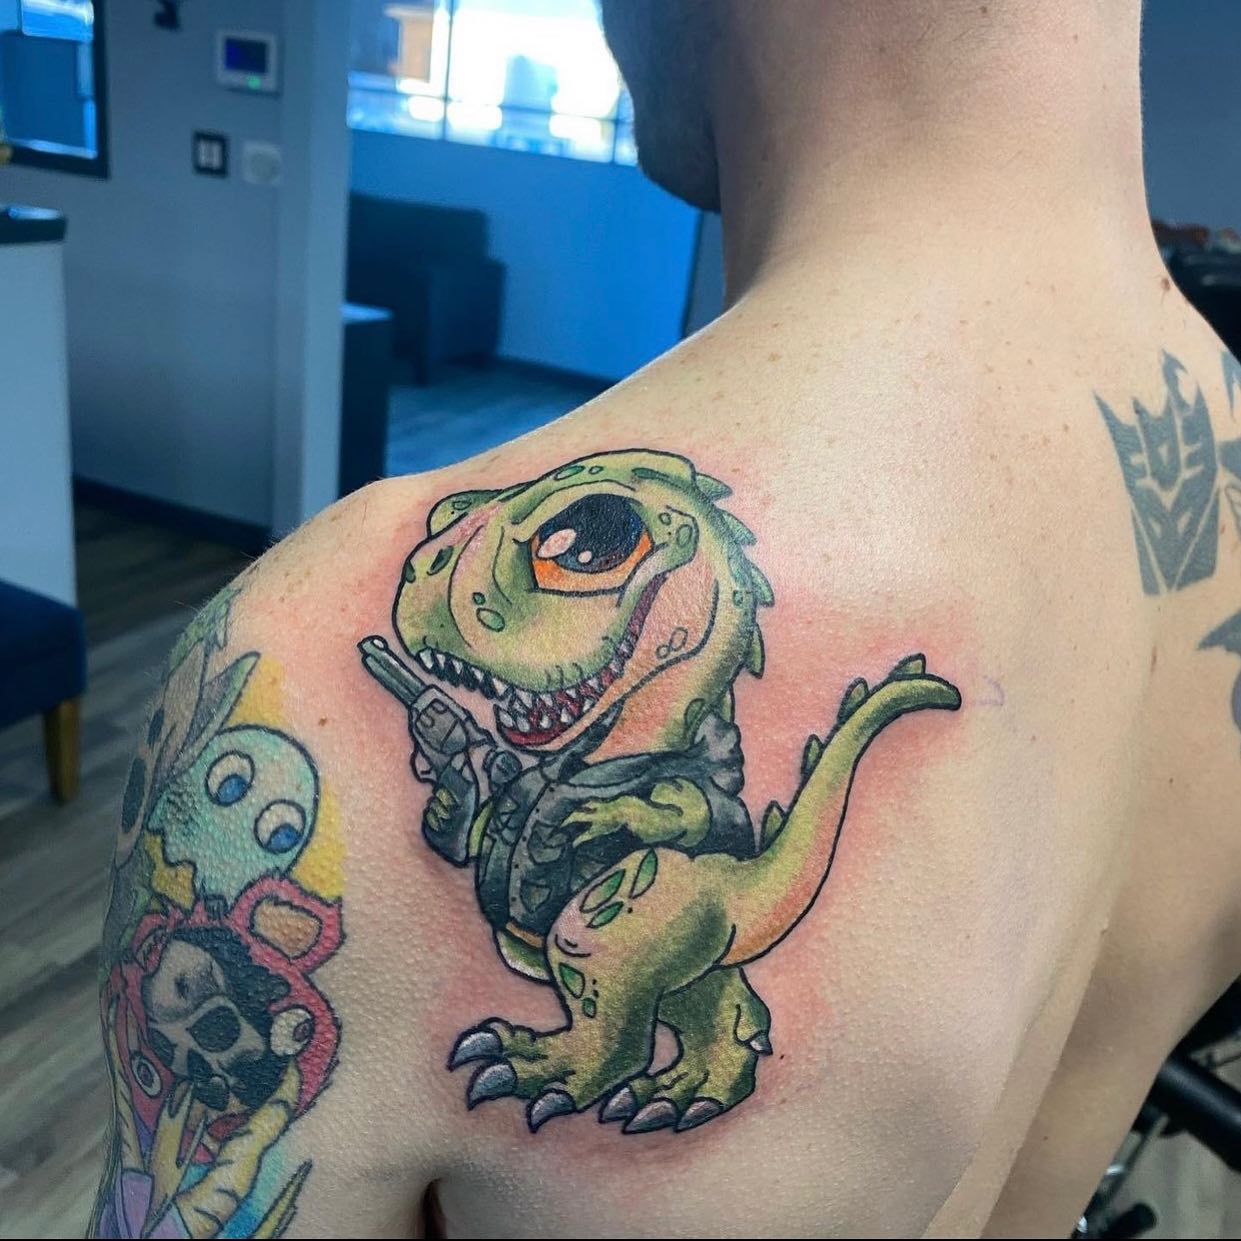 Simple and cute, this dinosaur cartoon tattoo is for those who fancy funny and creative ideas + guys who are still kids at heart.